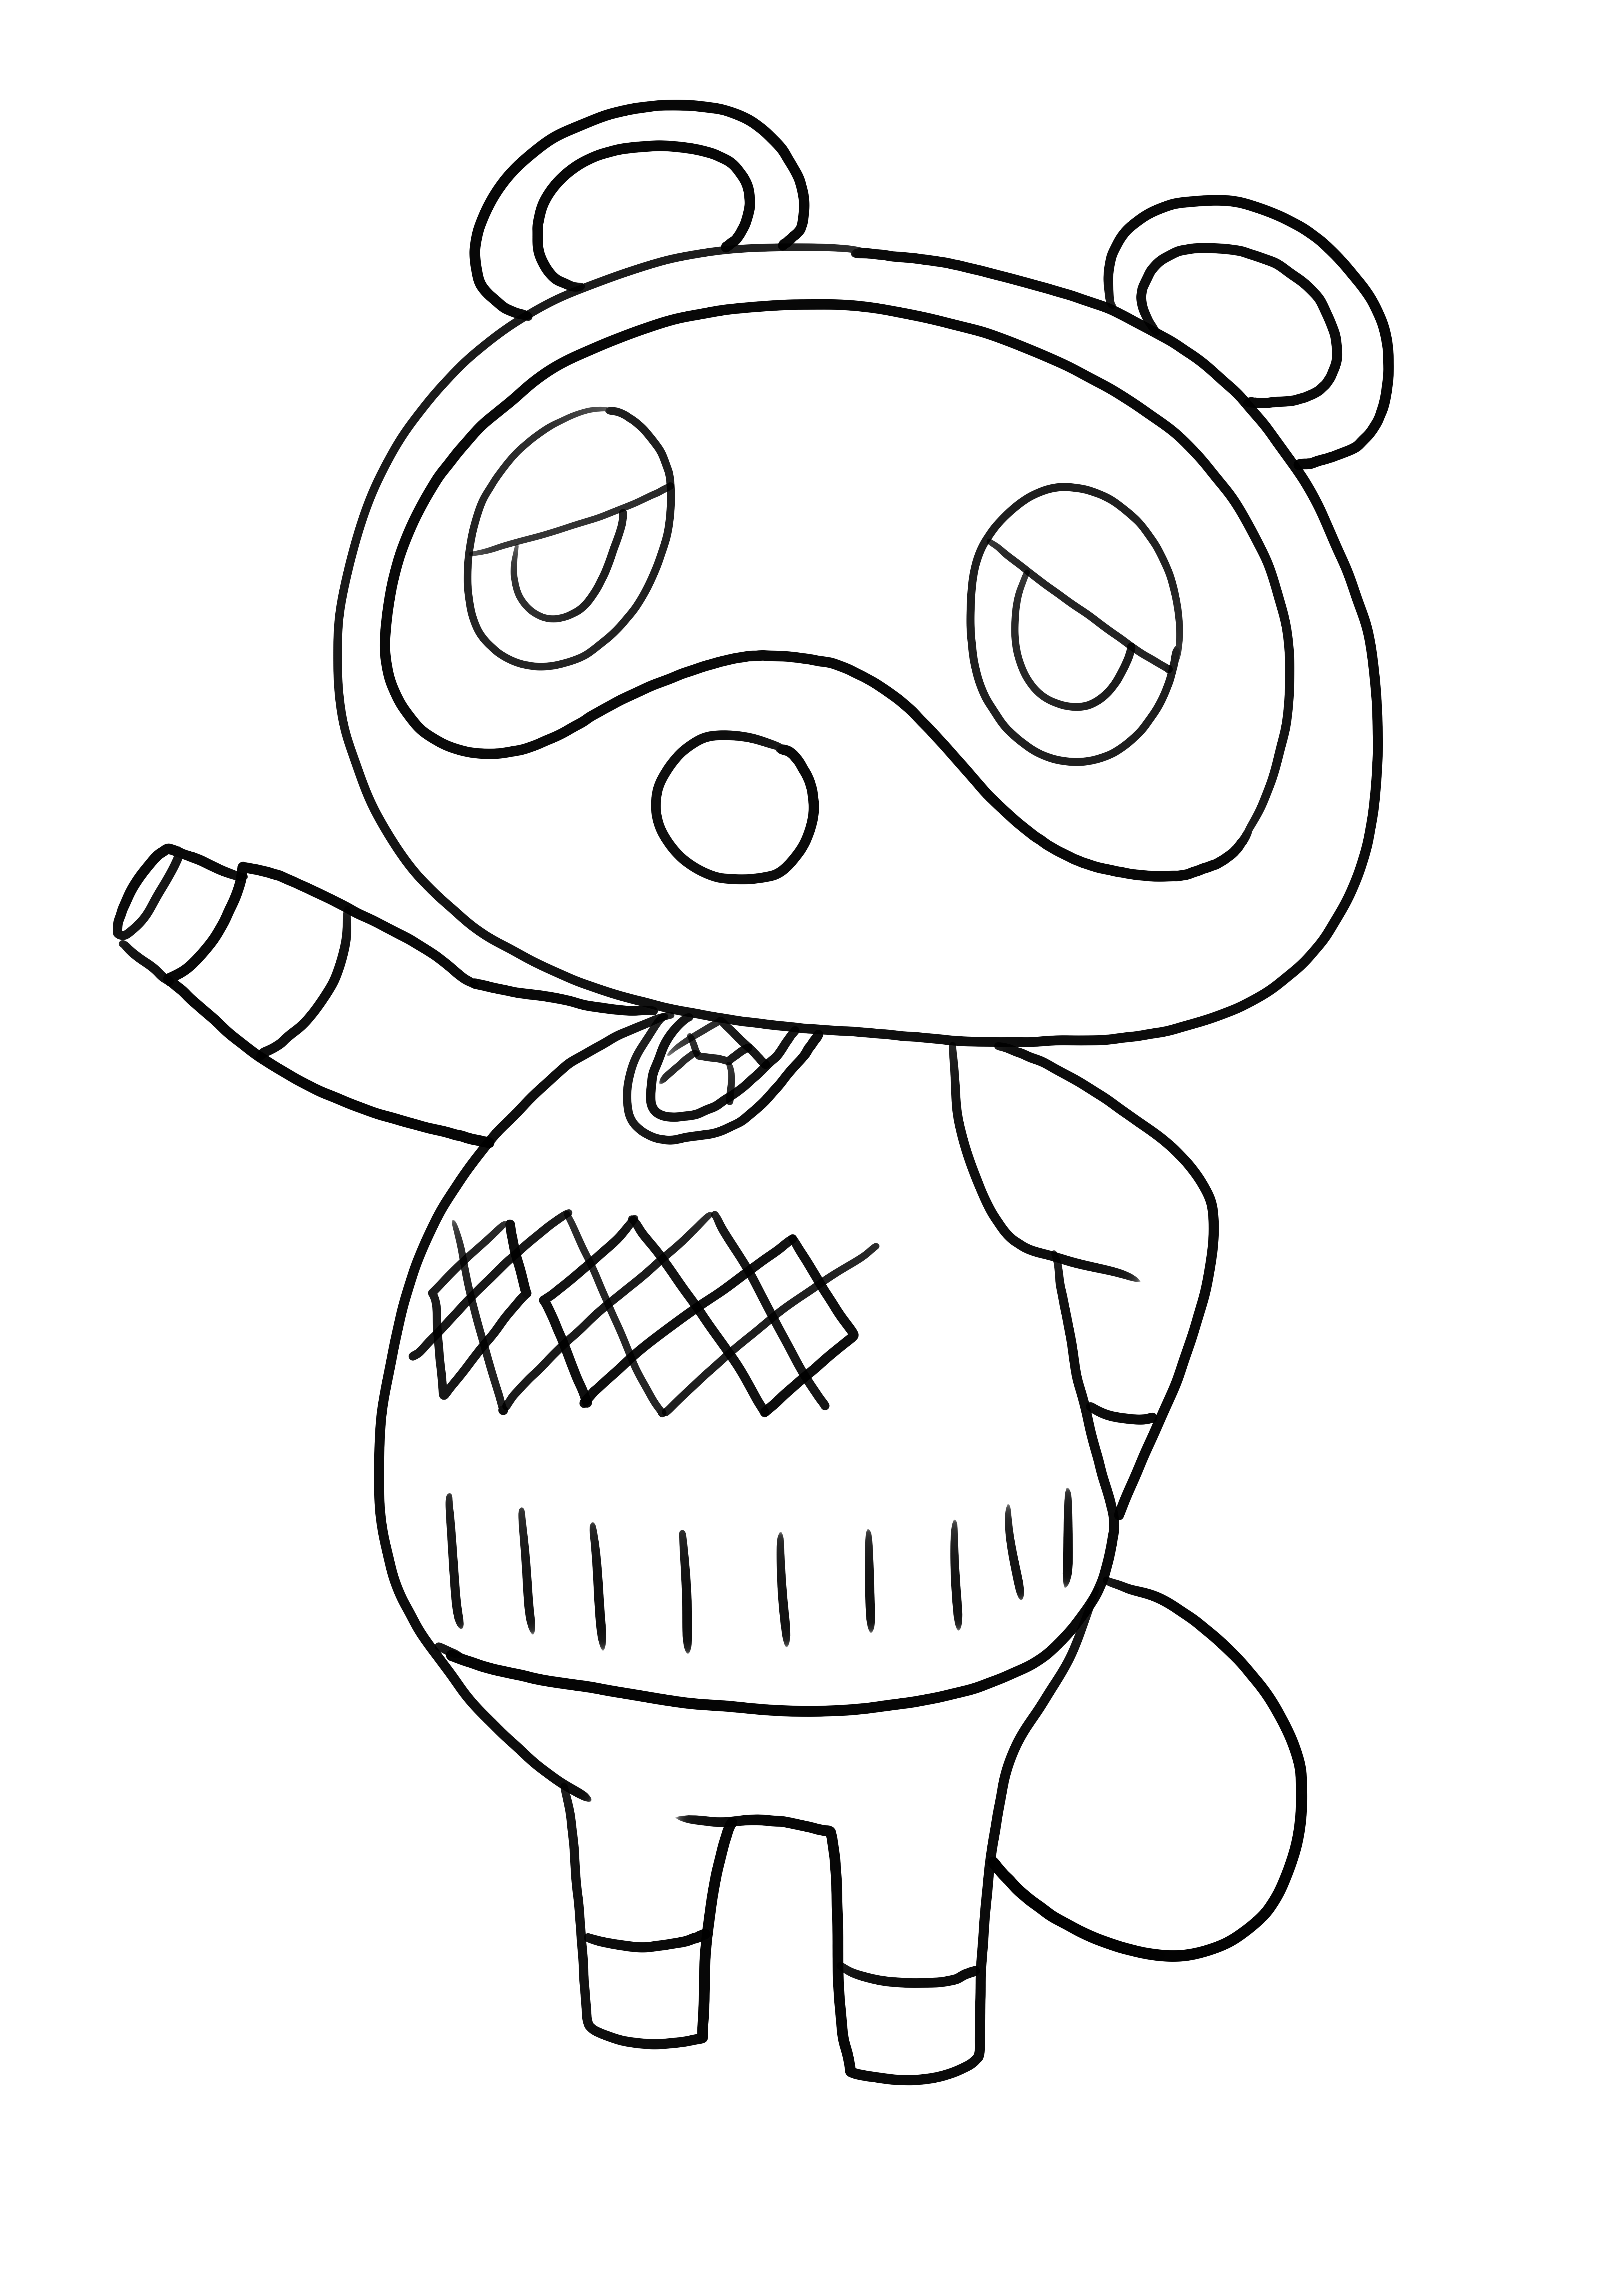 Tom Nook from Animal Crossing coloring page to print and coloring